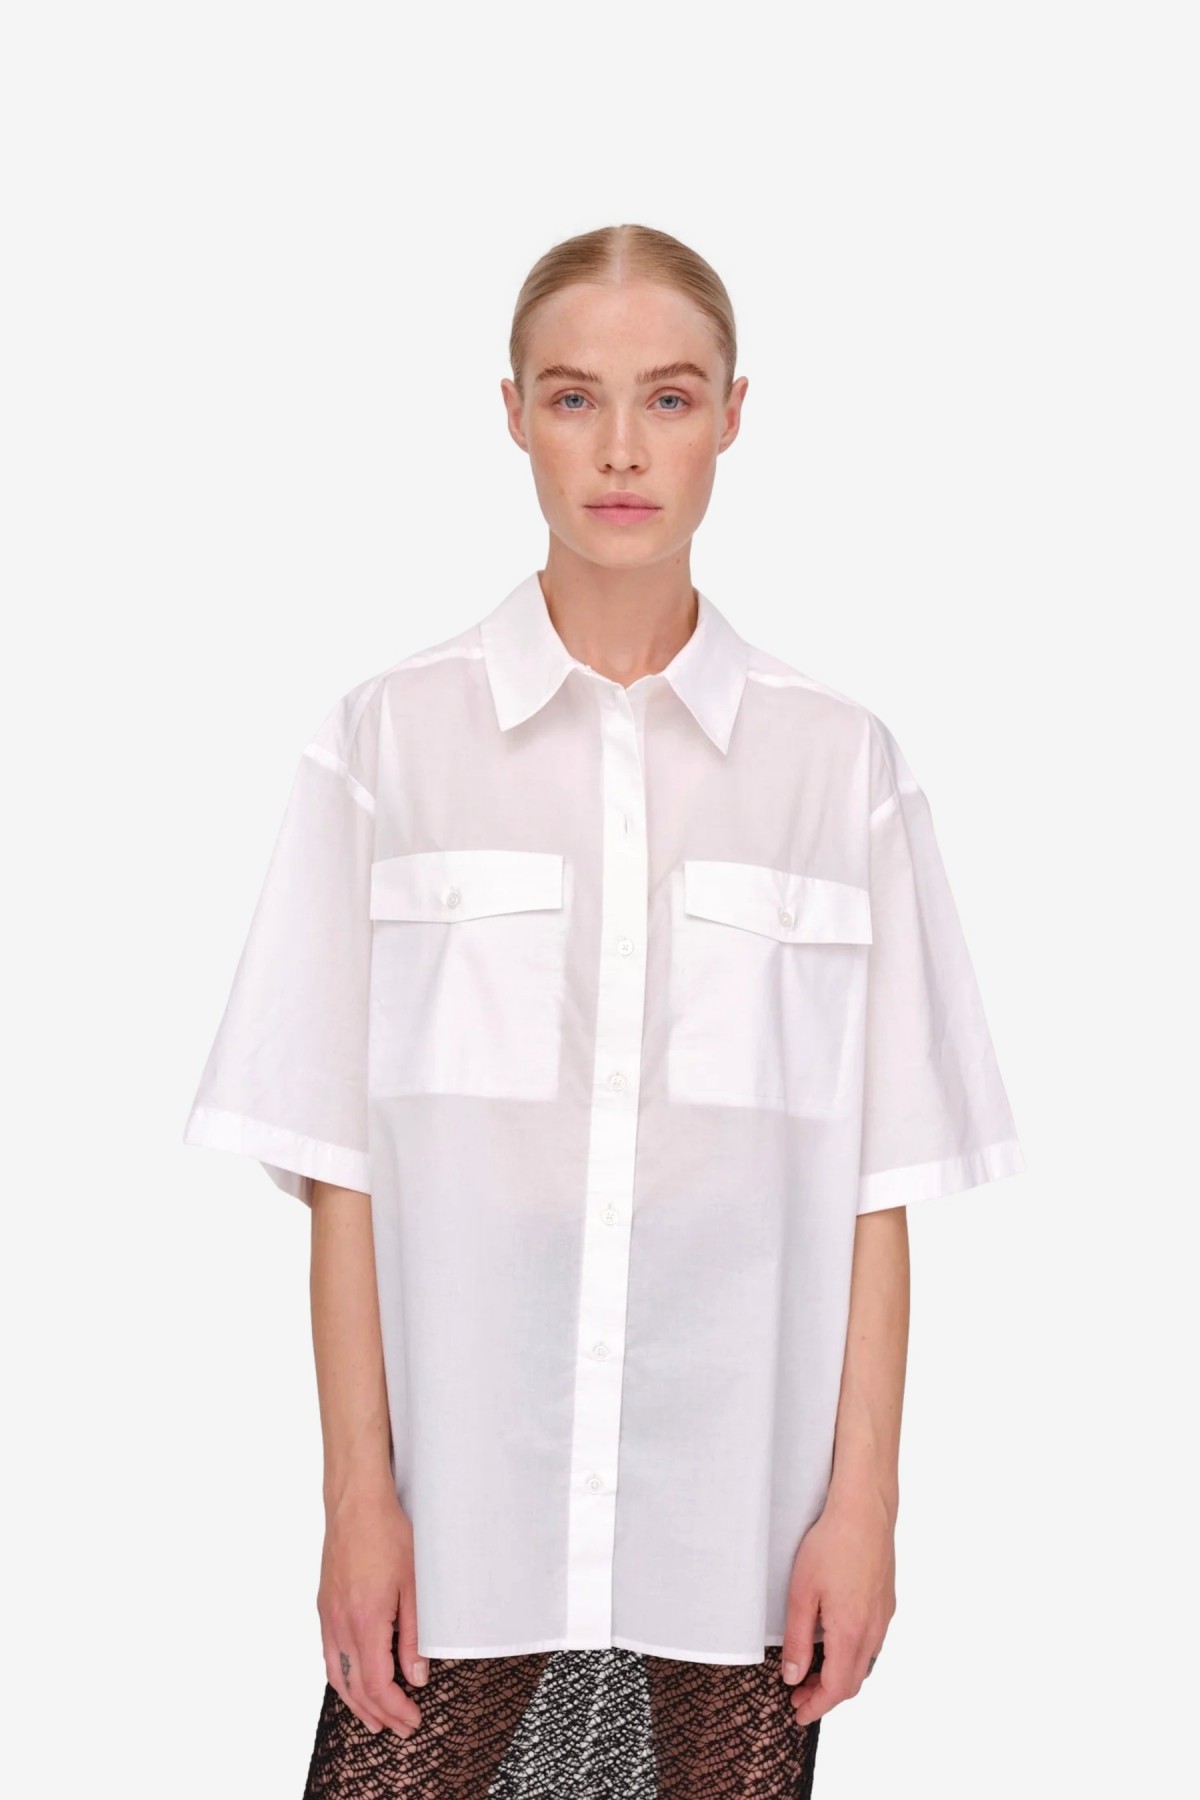 Herskind Helle Shirt in White